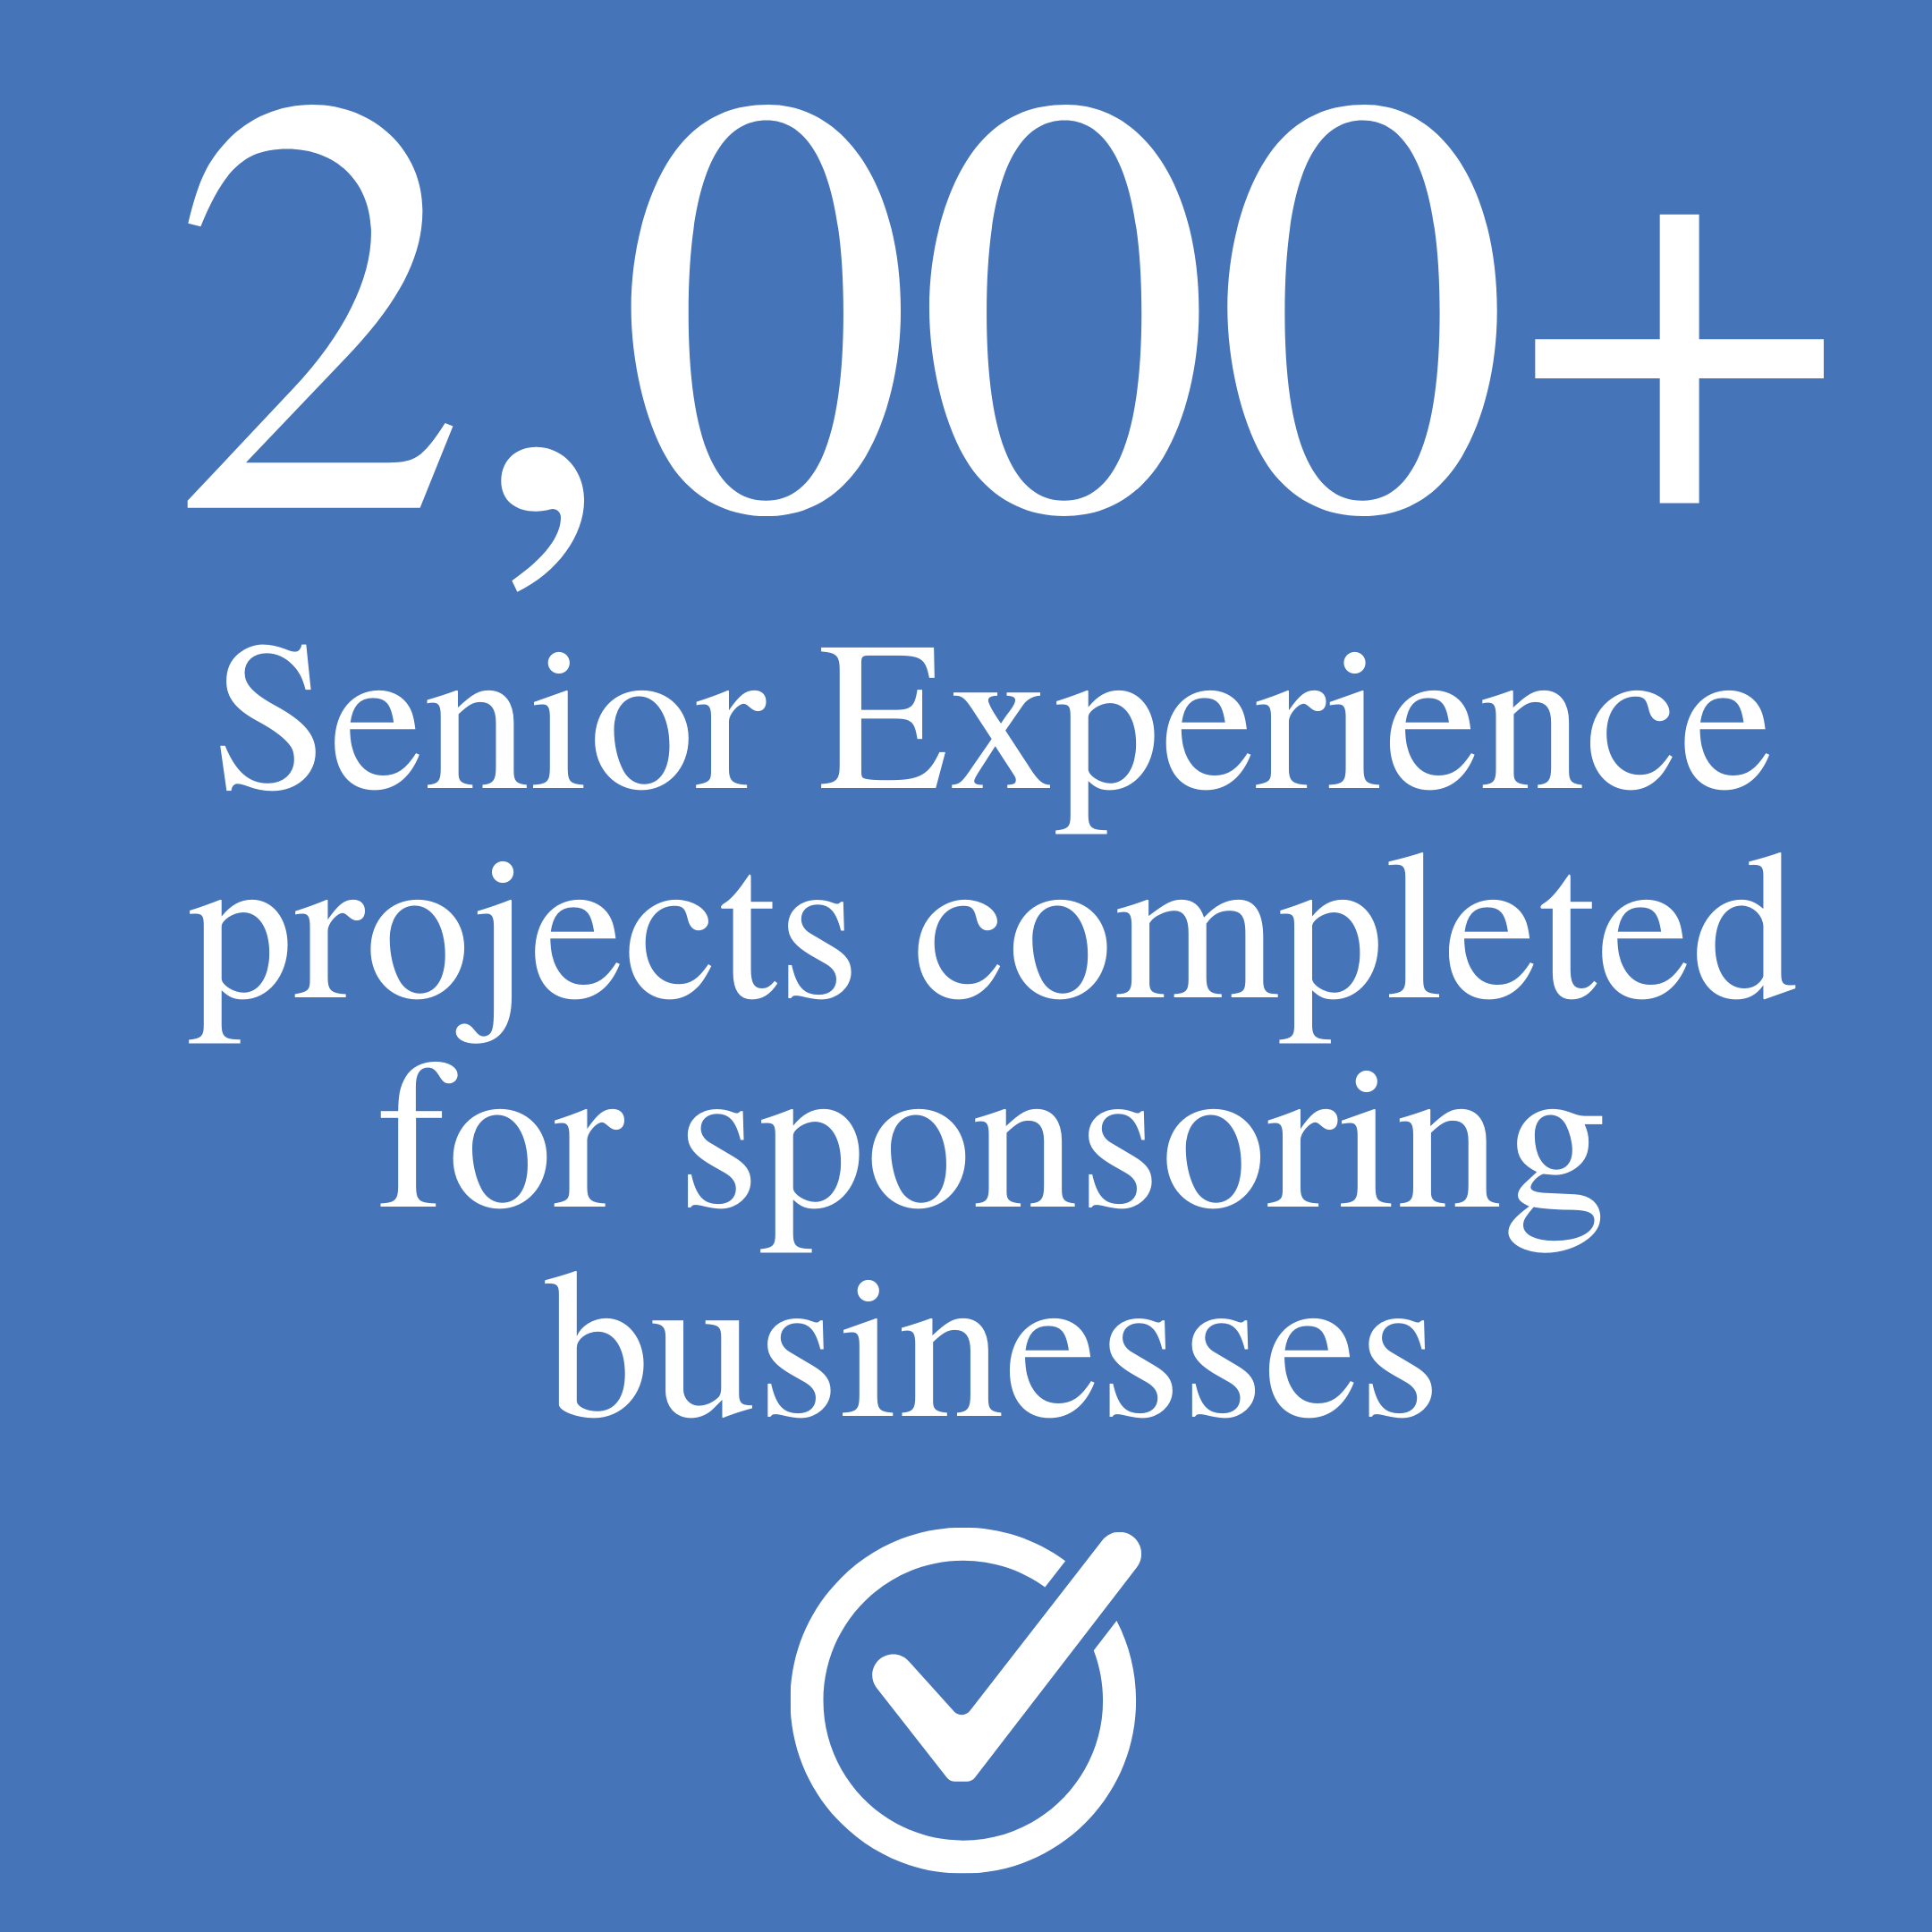 2000 senior experience projects have been completed for sponsoring businesses